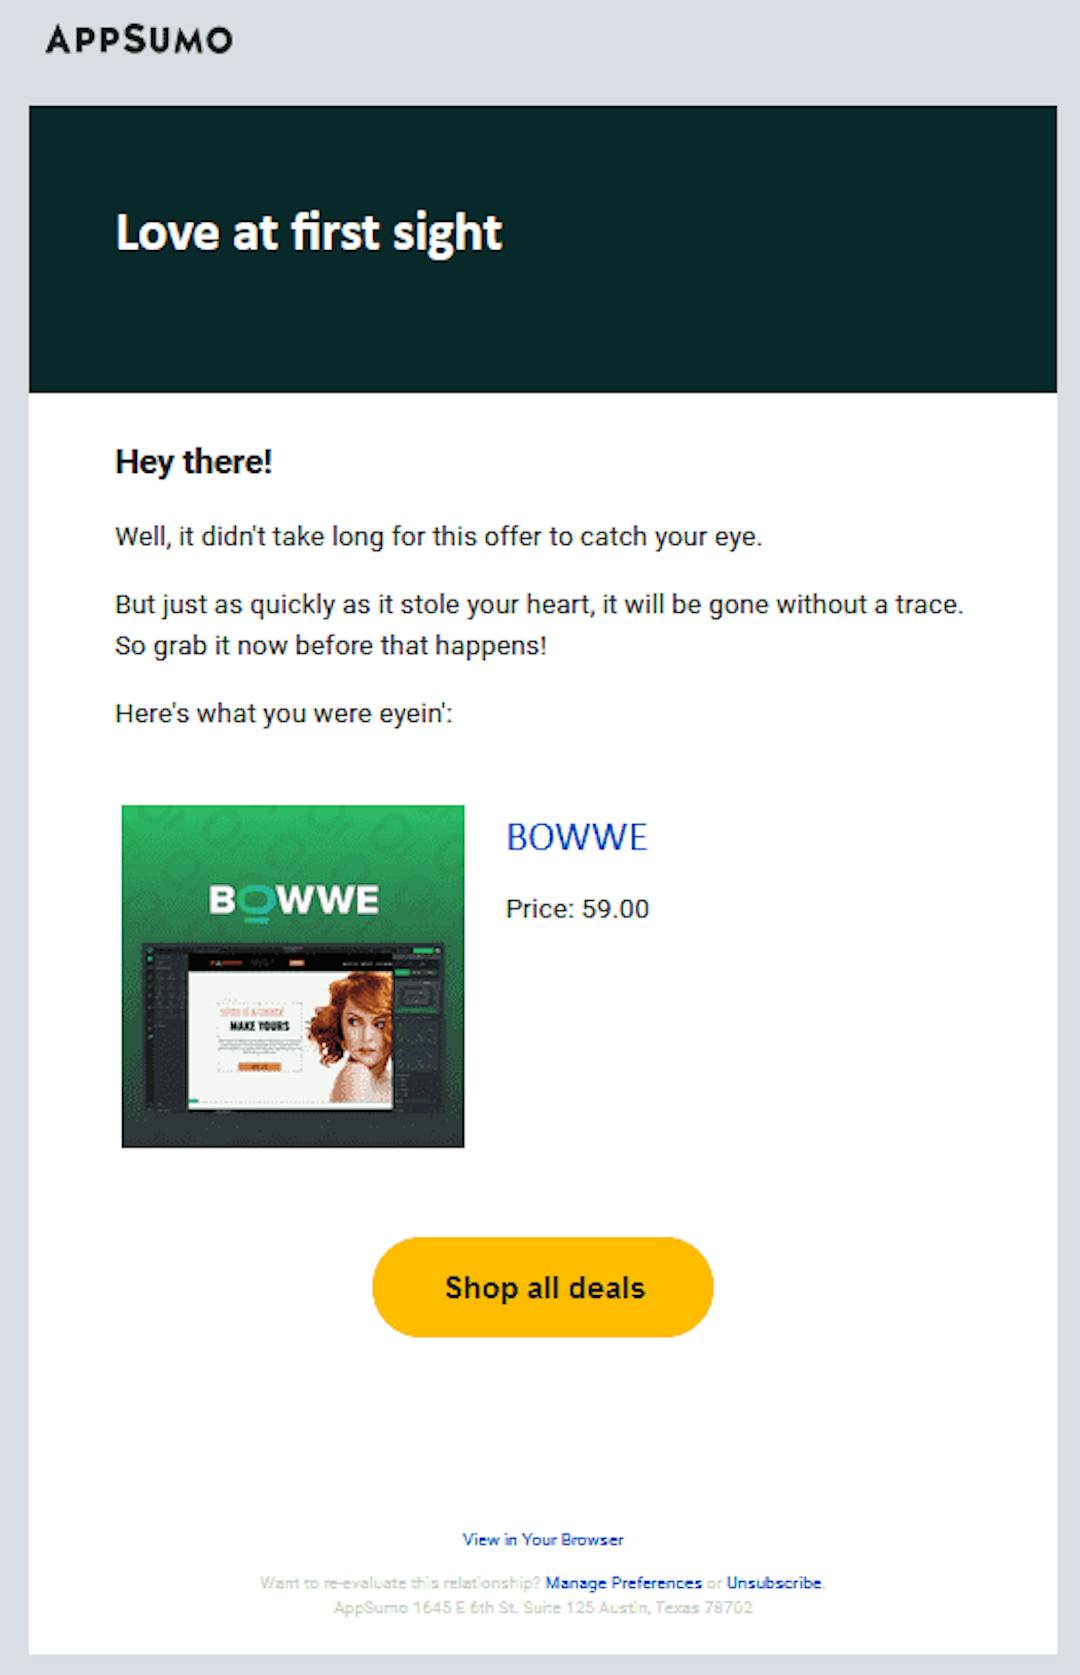 Newsletter from AppSumo reminding users about the end of the BOWWE campaign